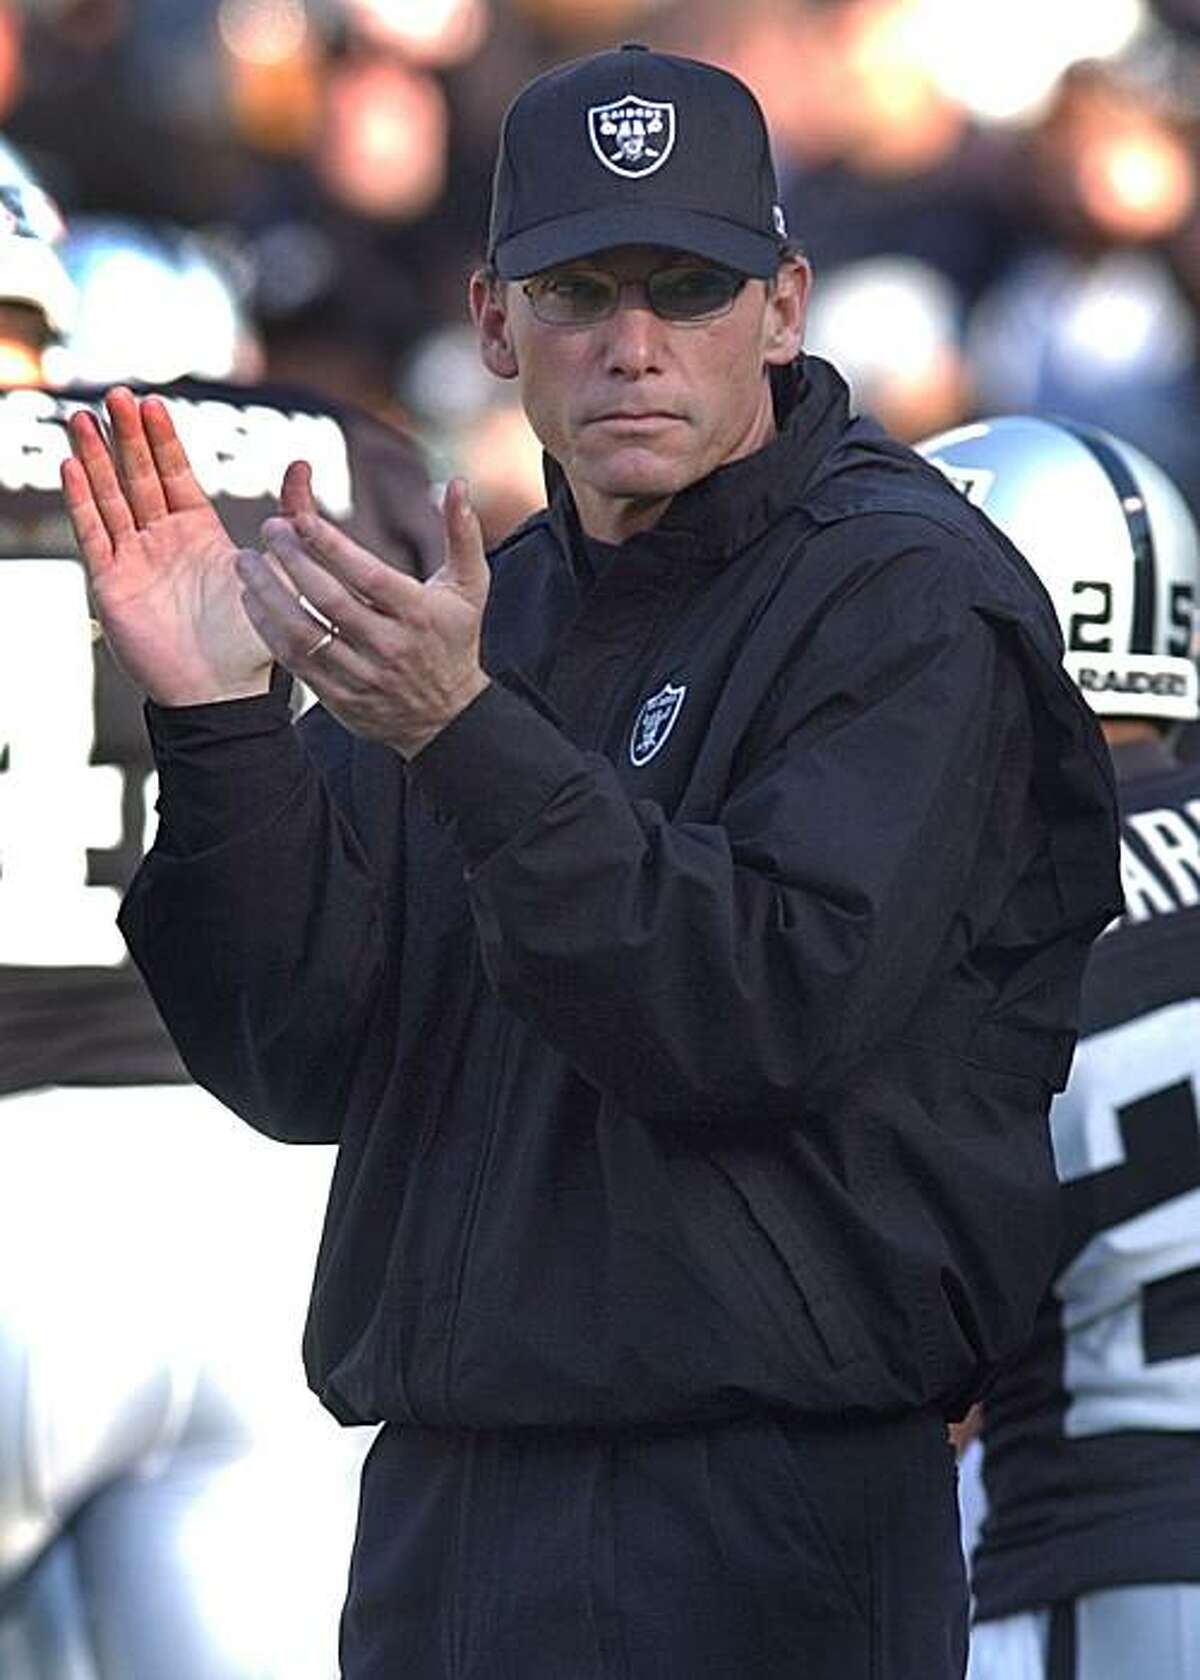 ** FOR USE ANYTIME WITH 2003 SUPER BOWL STORIES ** Oakland Raiders offensive coordinator Marc Trestman watches the team take the field during warmups before the AFC Championship game against the Tennessee Titans Sunday, Jan. 19, 2003 in Oakland, Calif. (AP Photo/Julie Jacobson)